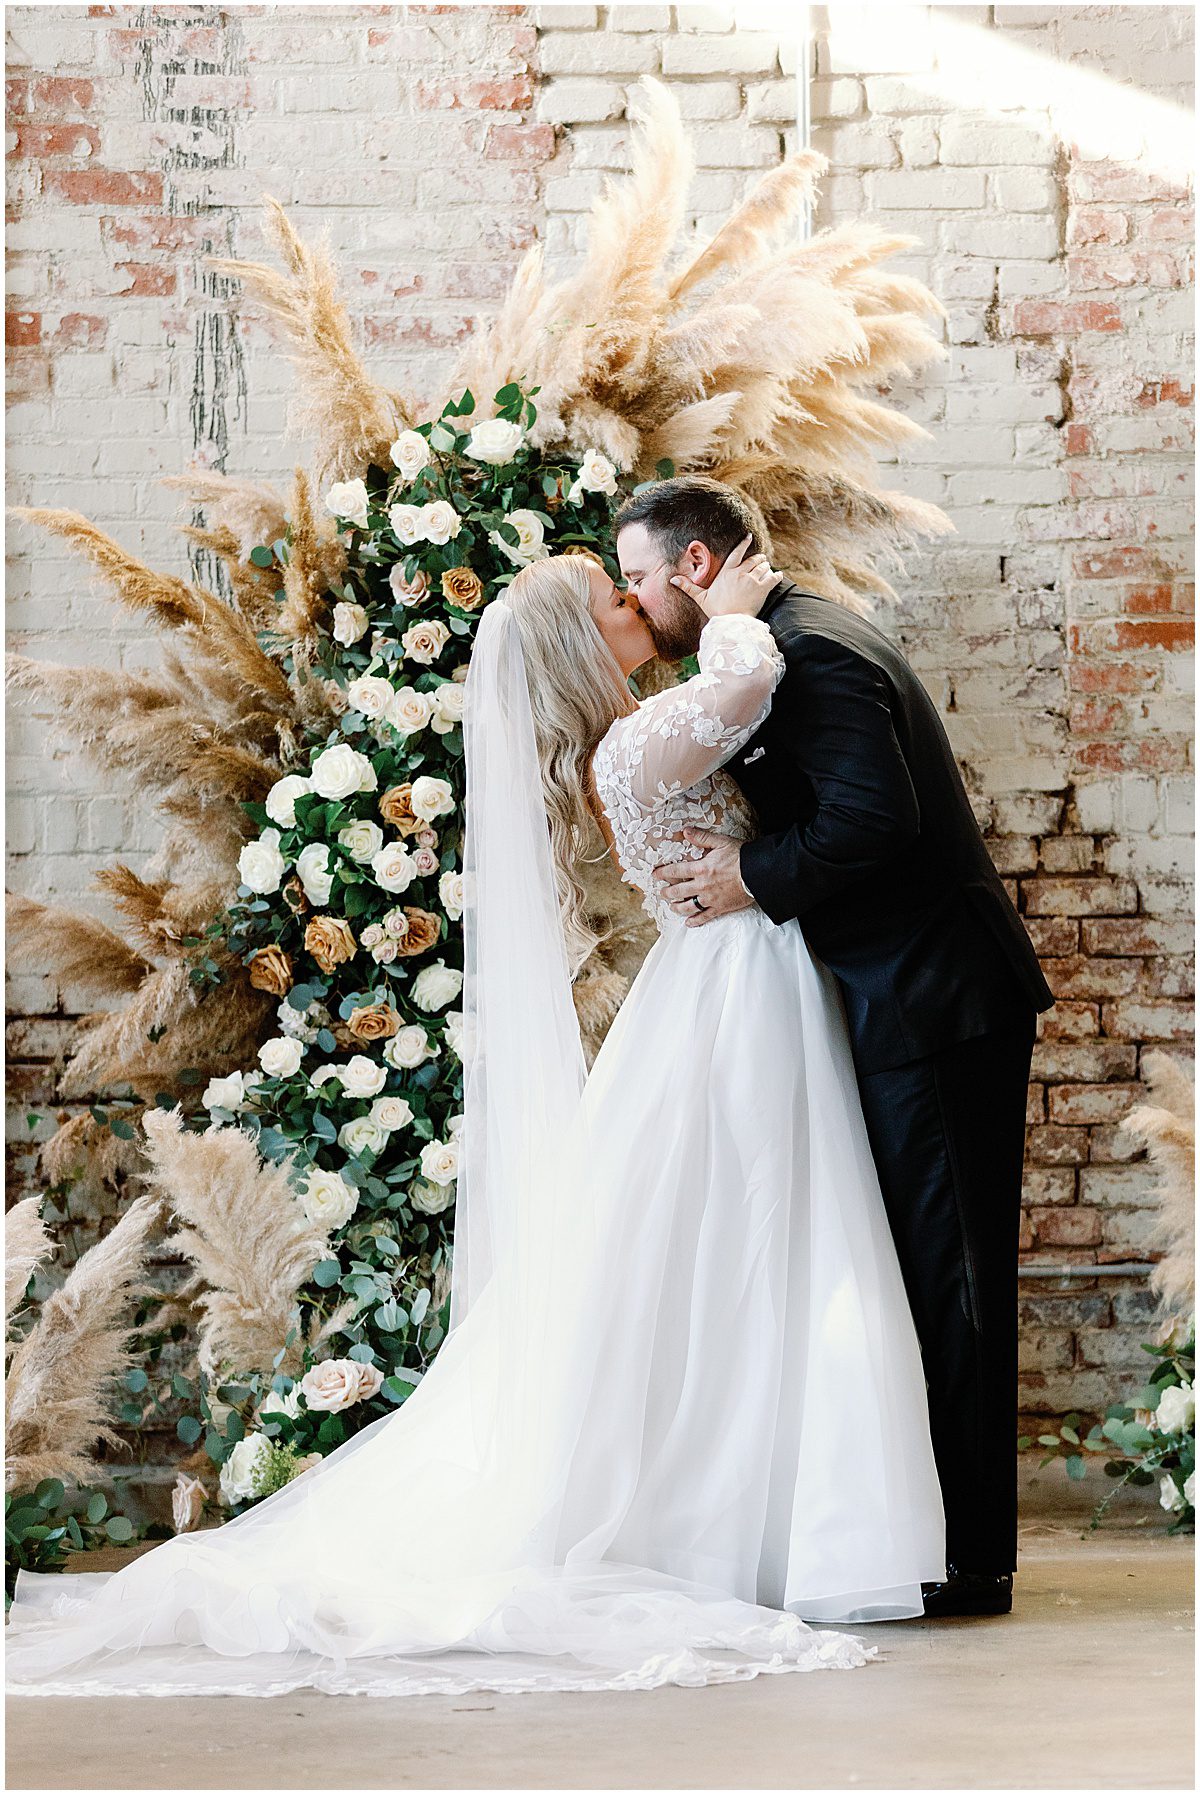 Bride and Groom First Kiss at Ceremony Atlanta Georgia Wedding at Guardian Works Photo